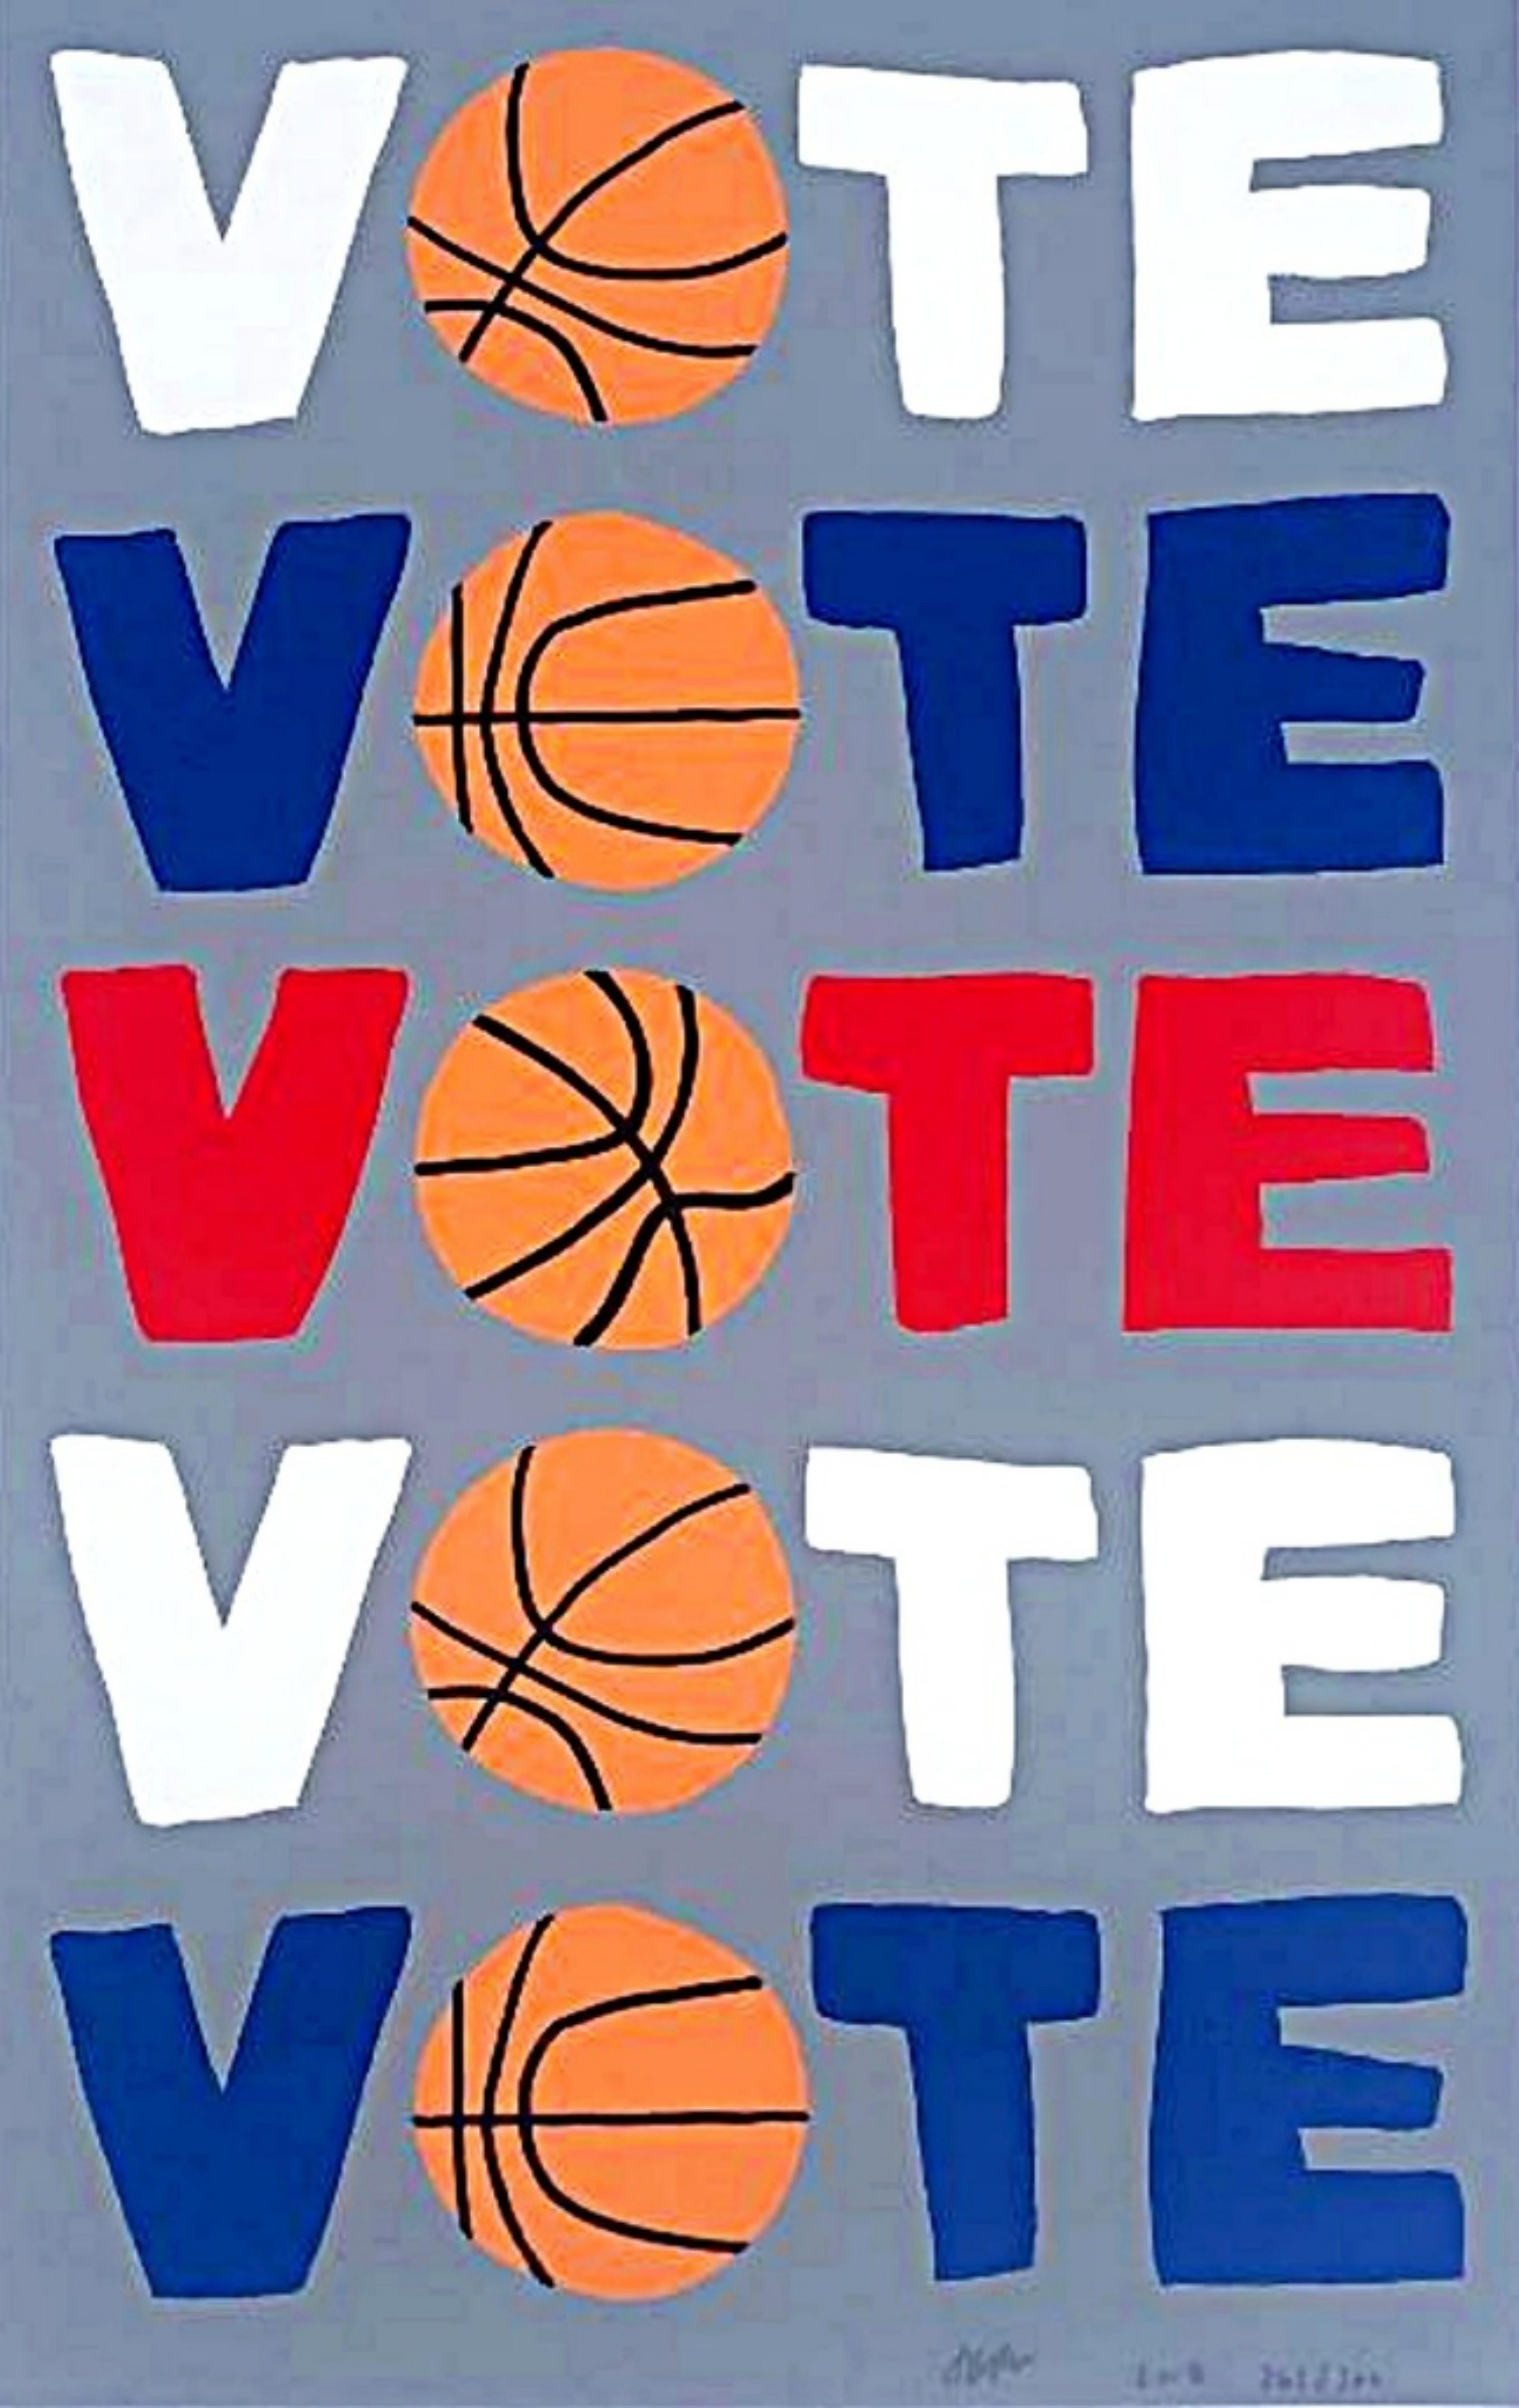 Jonas Wood Figurative Print - VOTE, limited edition political silkscreen with artist's famed basketball image